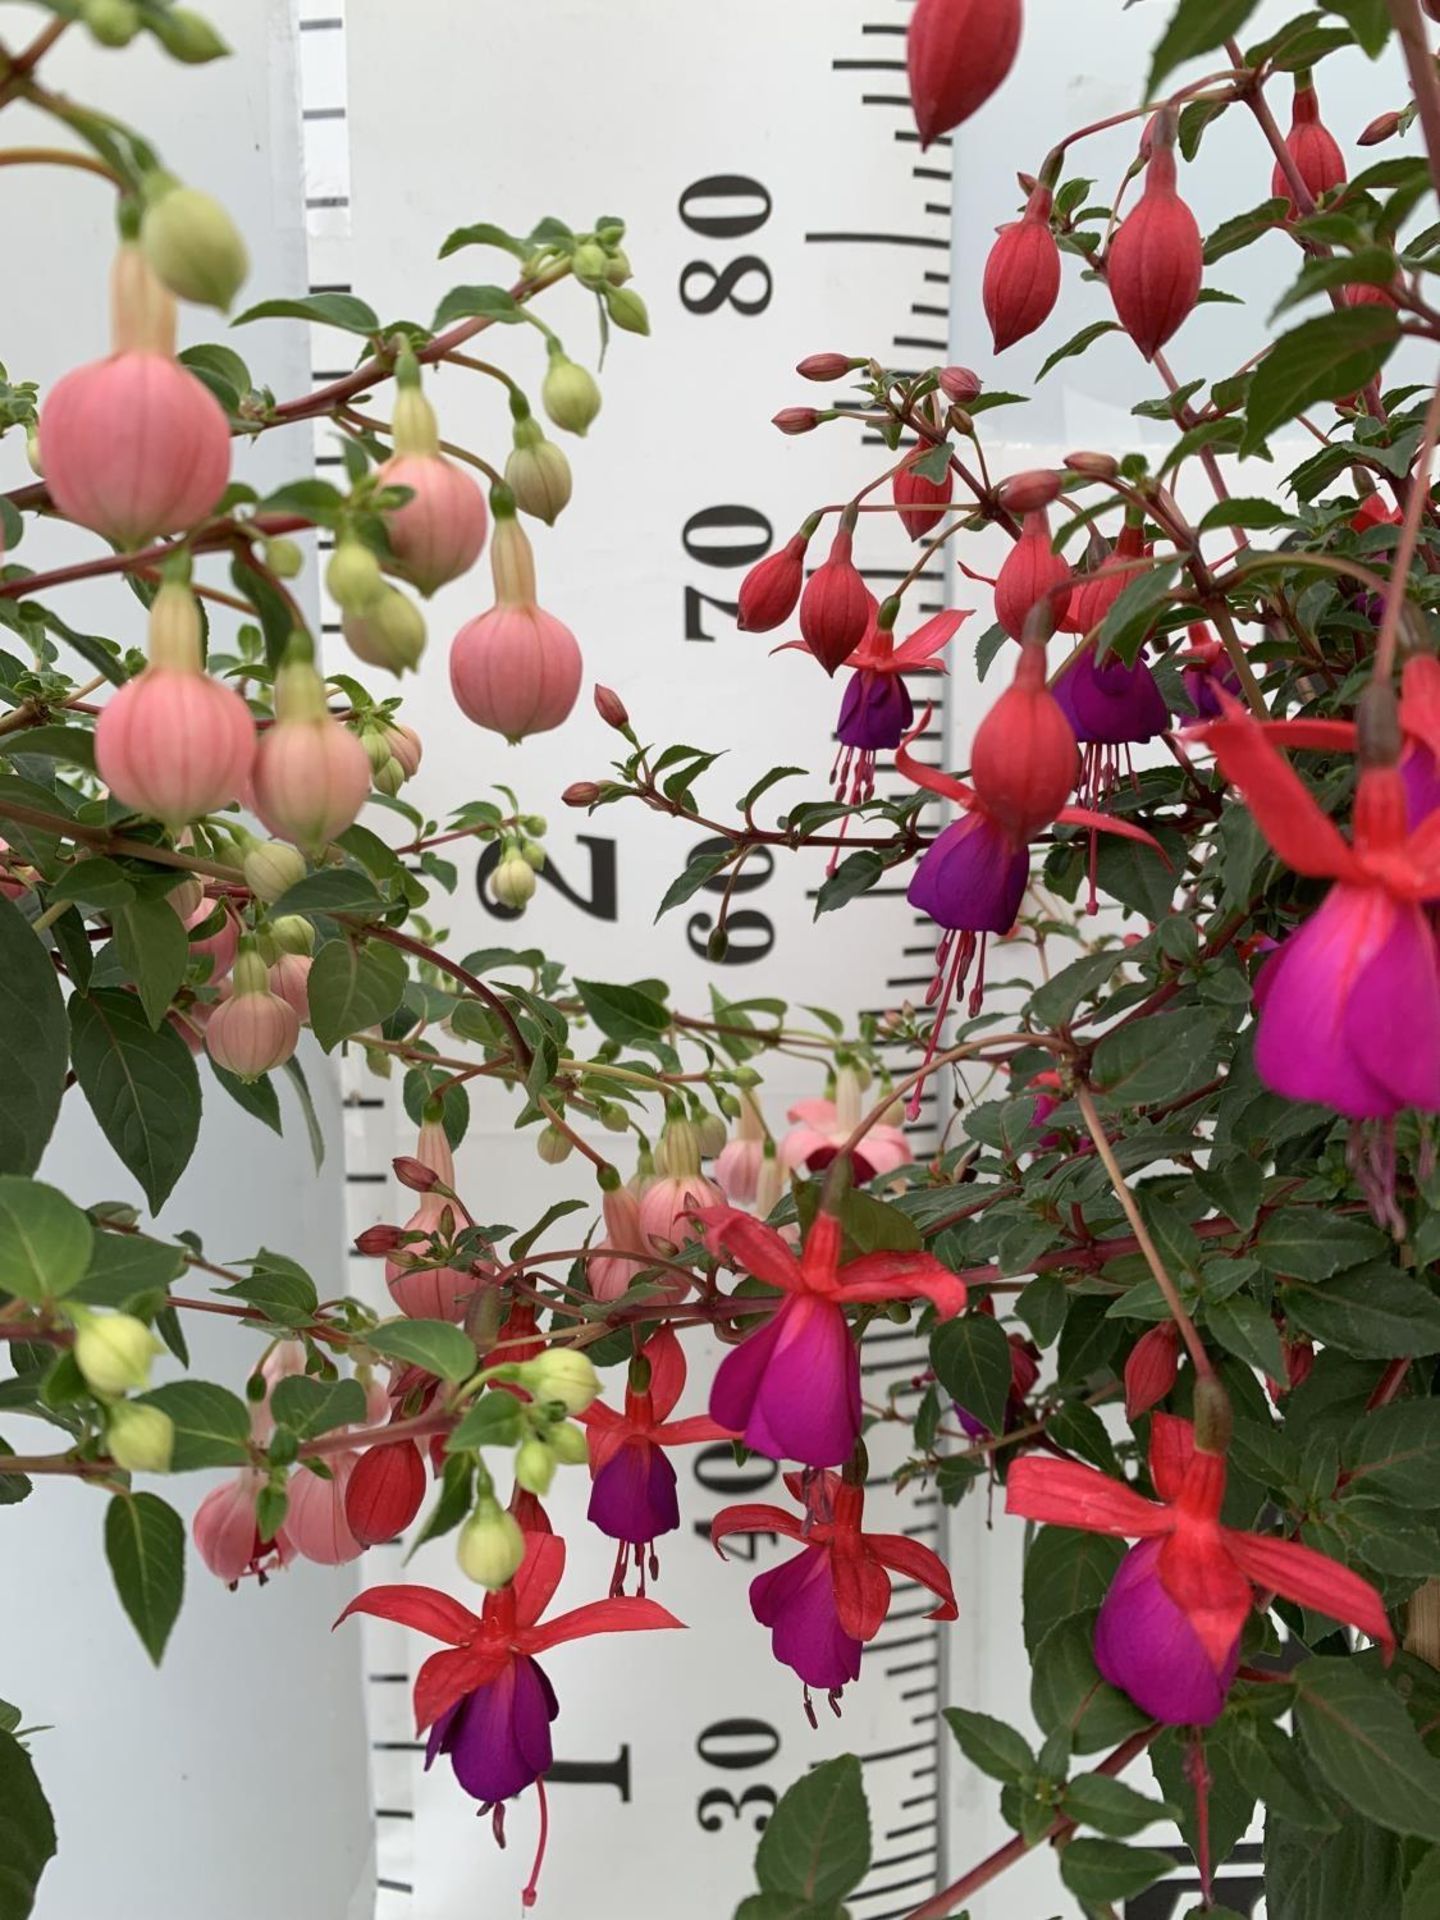 TWO BELLA STANDARD FUCHSIA IN A 3 LTR POTS 70CM -80CM TALL TO BE SOLD FOR THE TWO PLUS VAT - Image 6 of 8